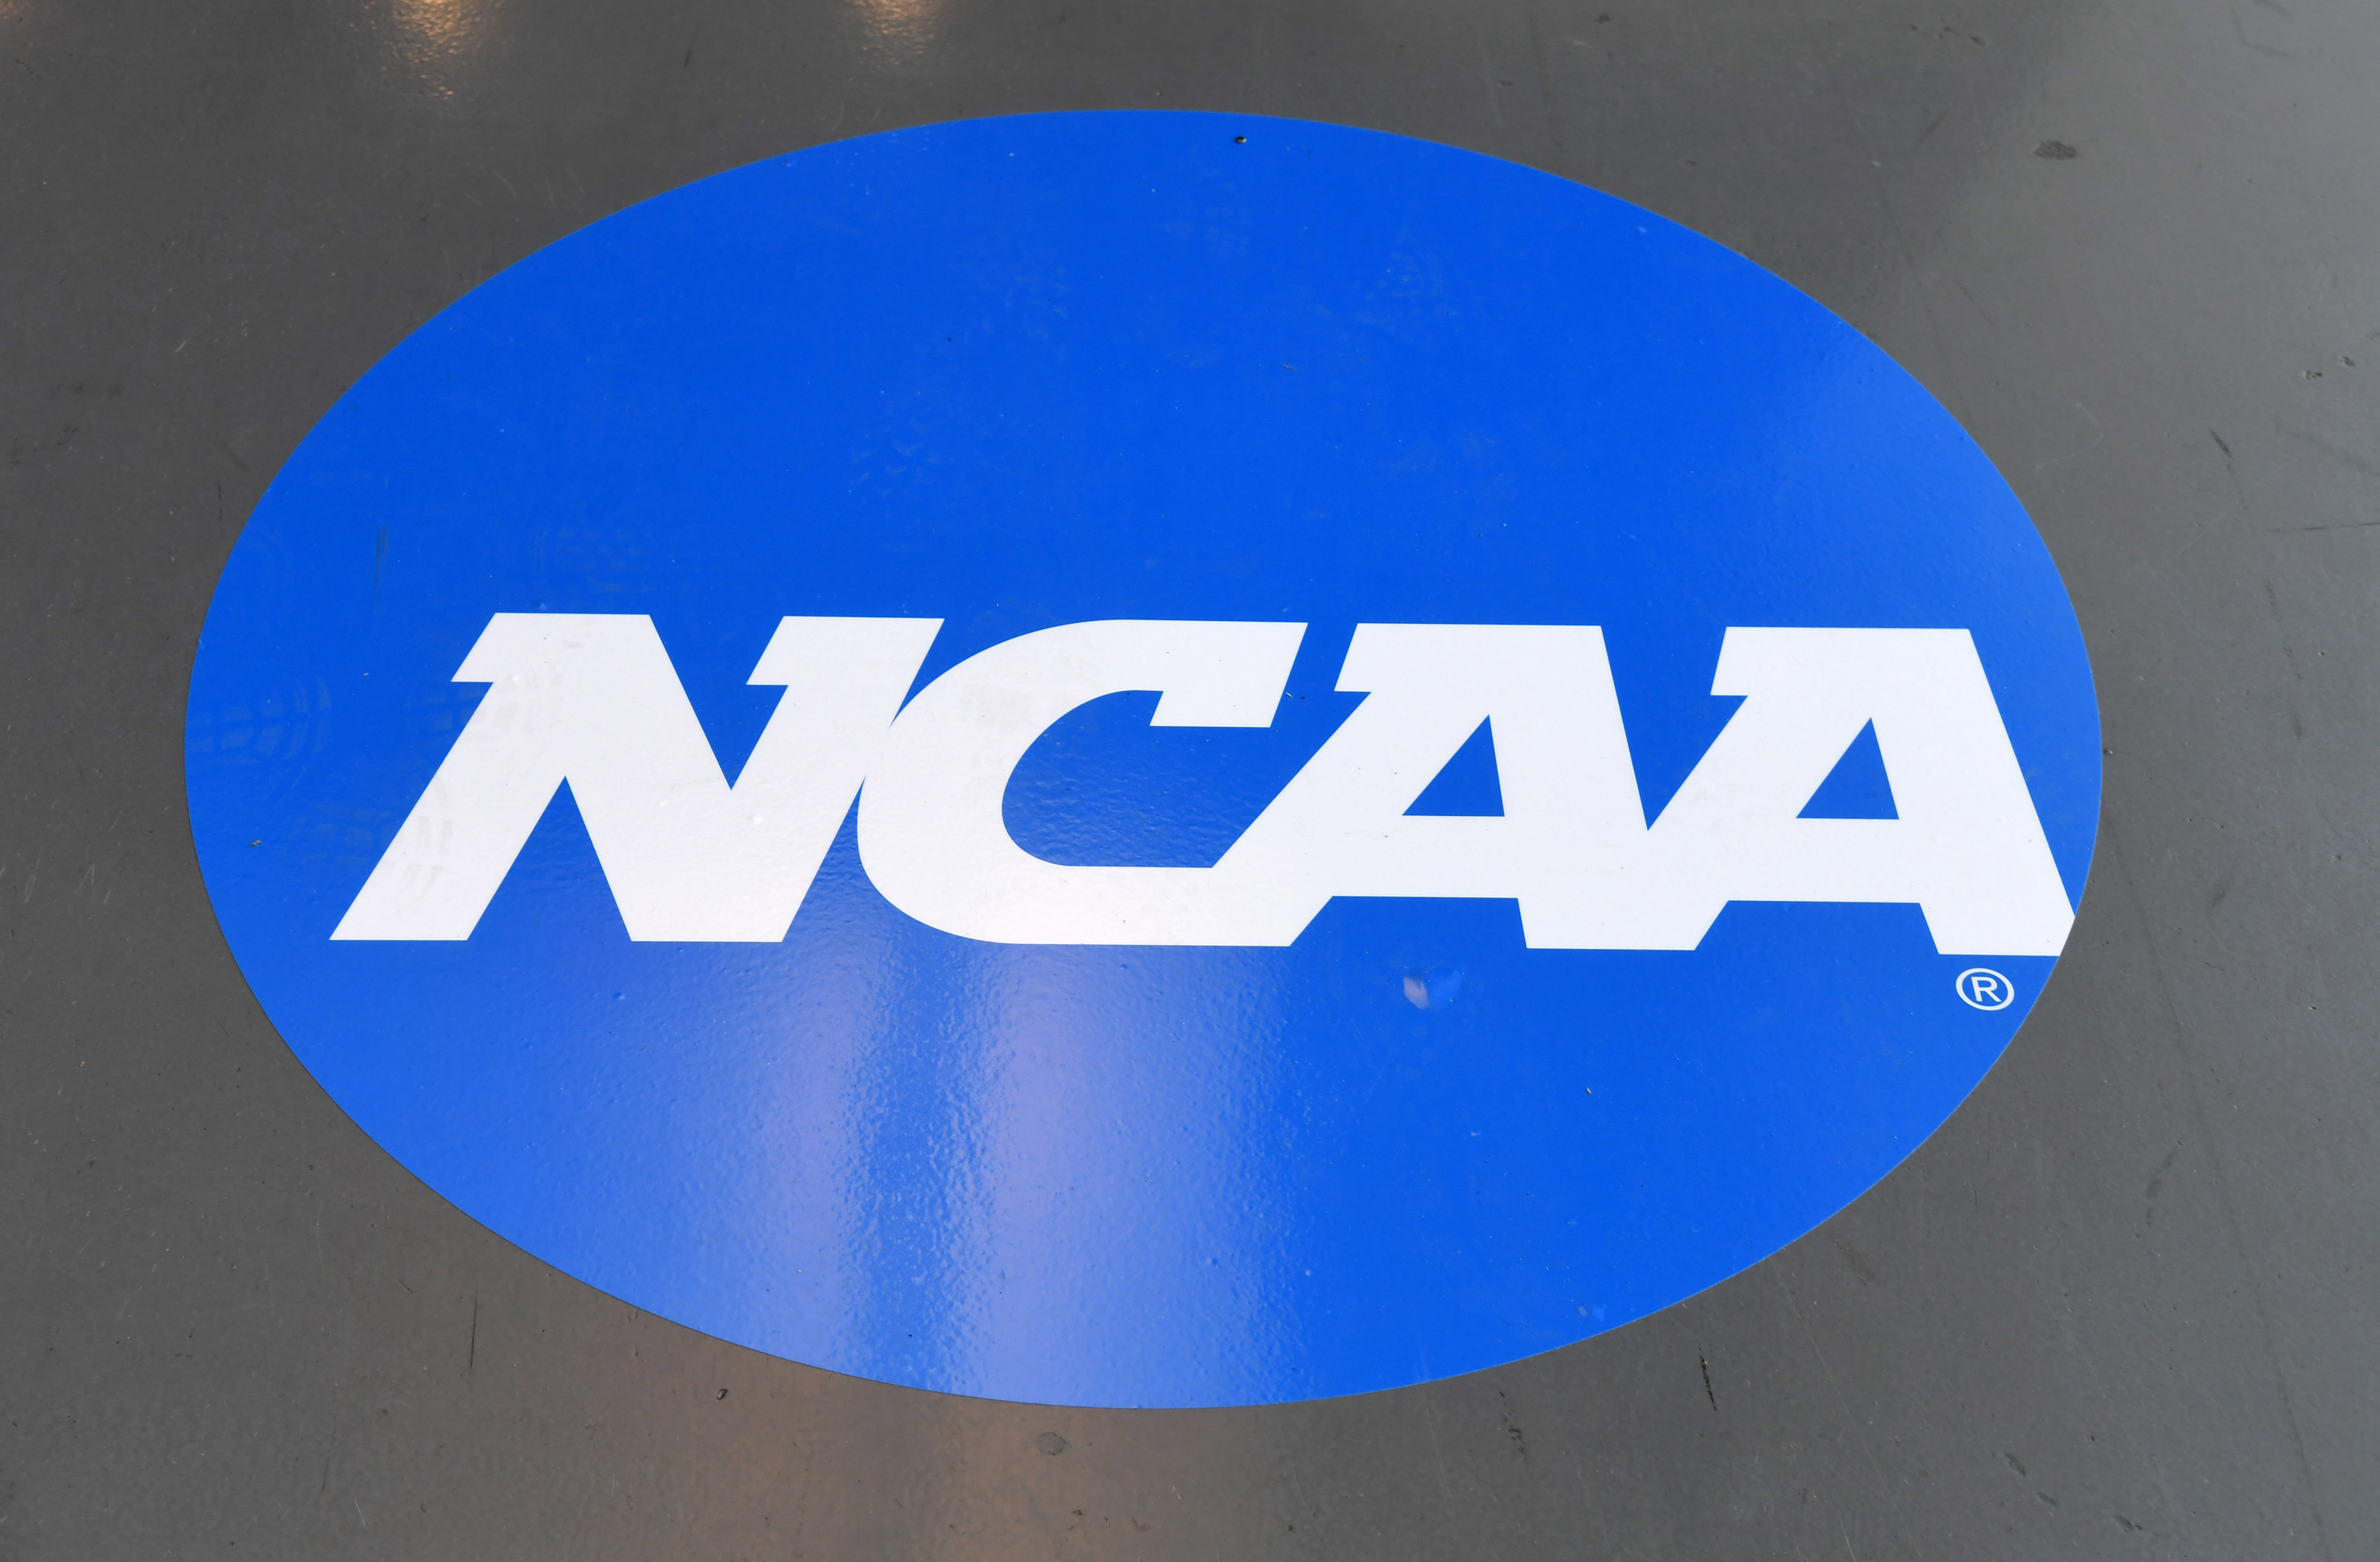 Track and Field: NCAA Indoor Championships